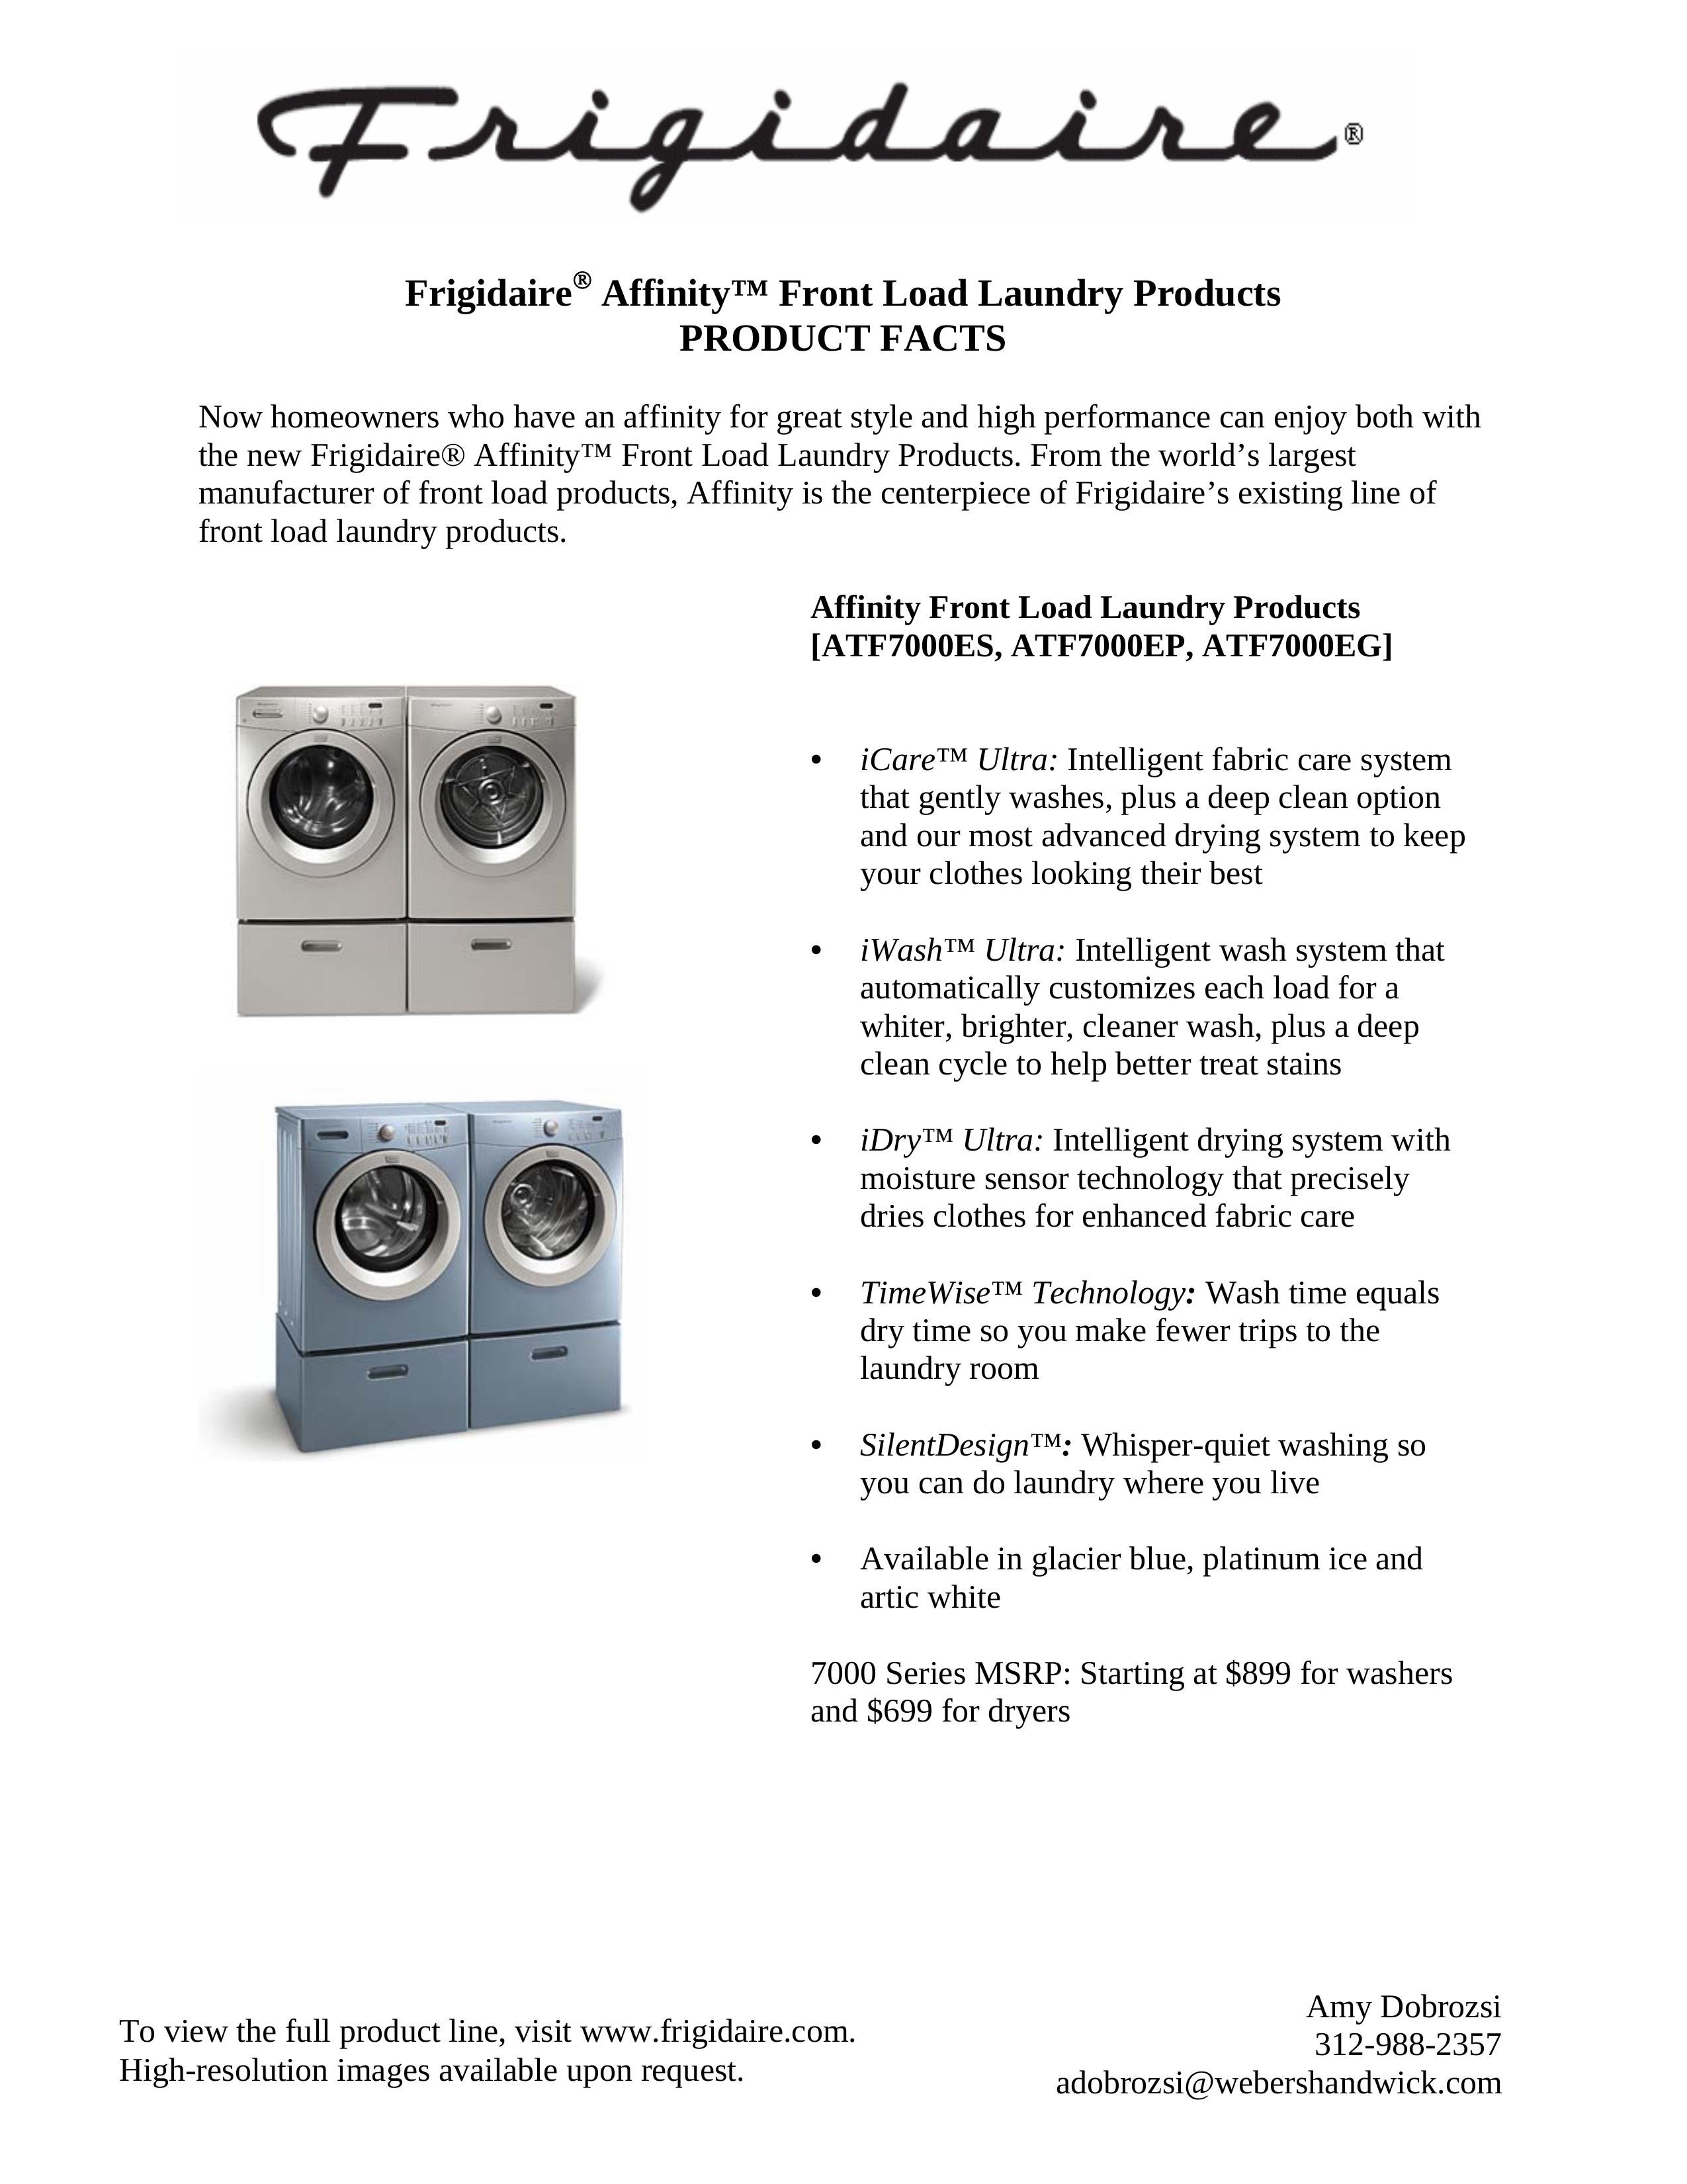 Frigidaire ATF7000EP Washer User Manual